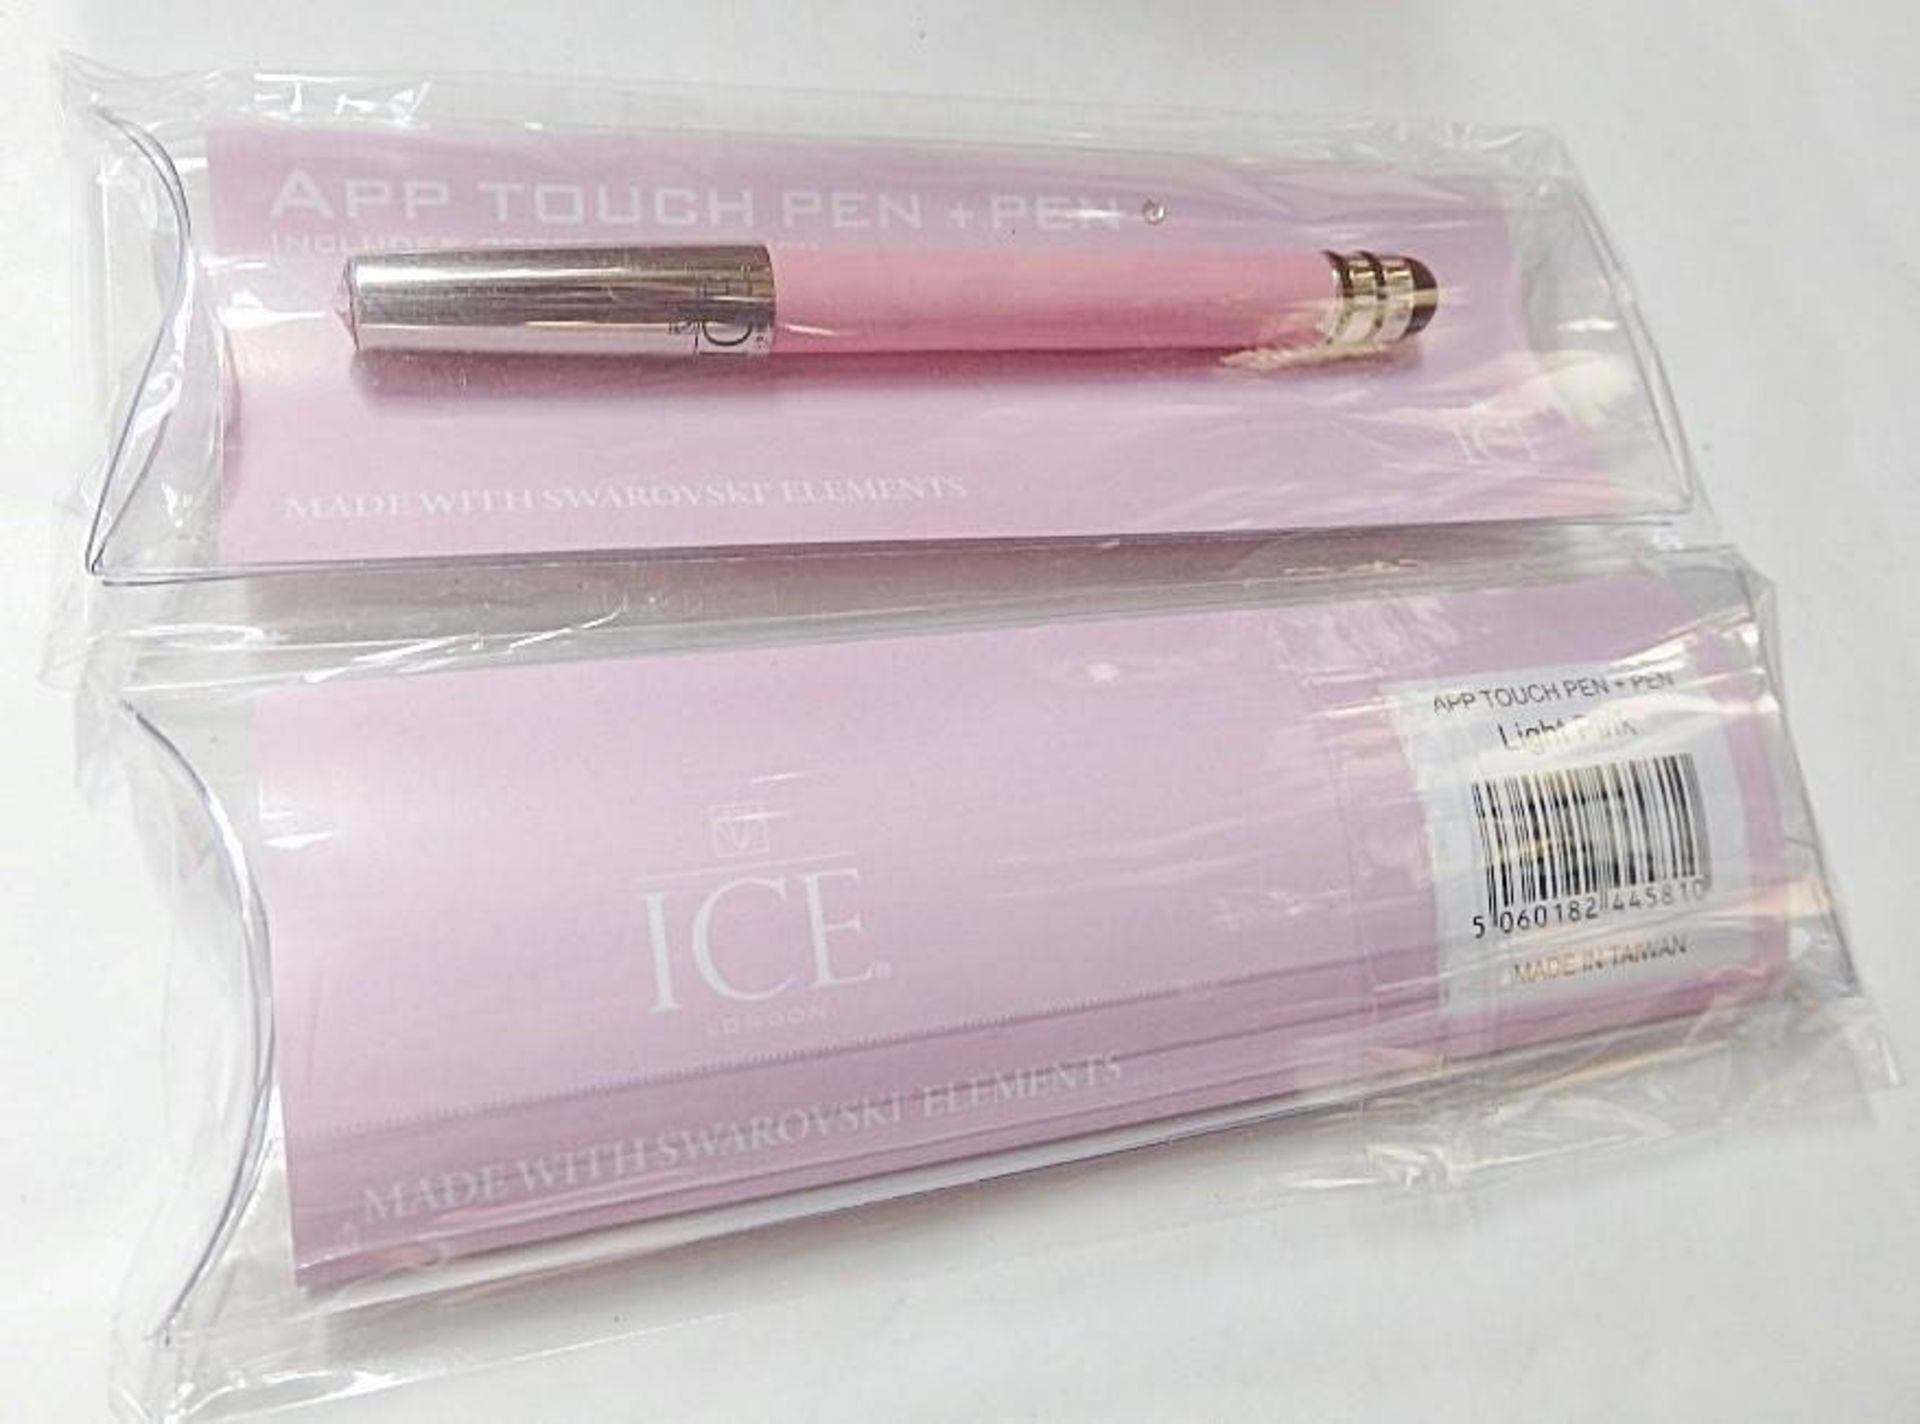 50 x ICE LONDON App Pen Duo - Touch Stylus And Ink Pen Combined - Colour: LIGHT PINK - MADE WITH - Image 4 of 6